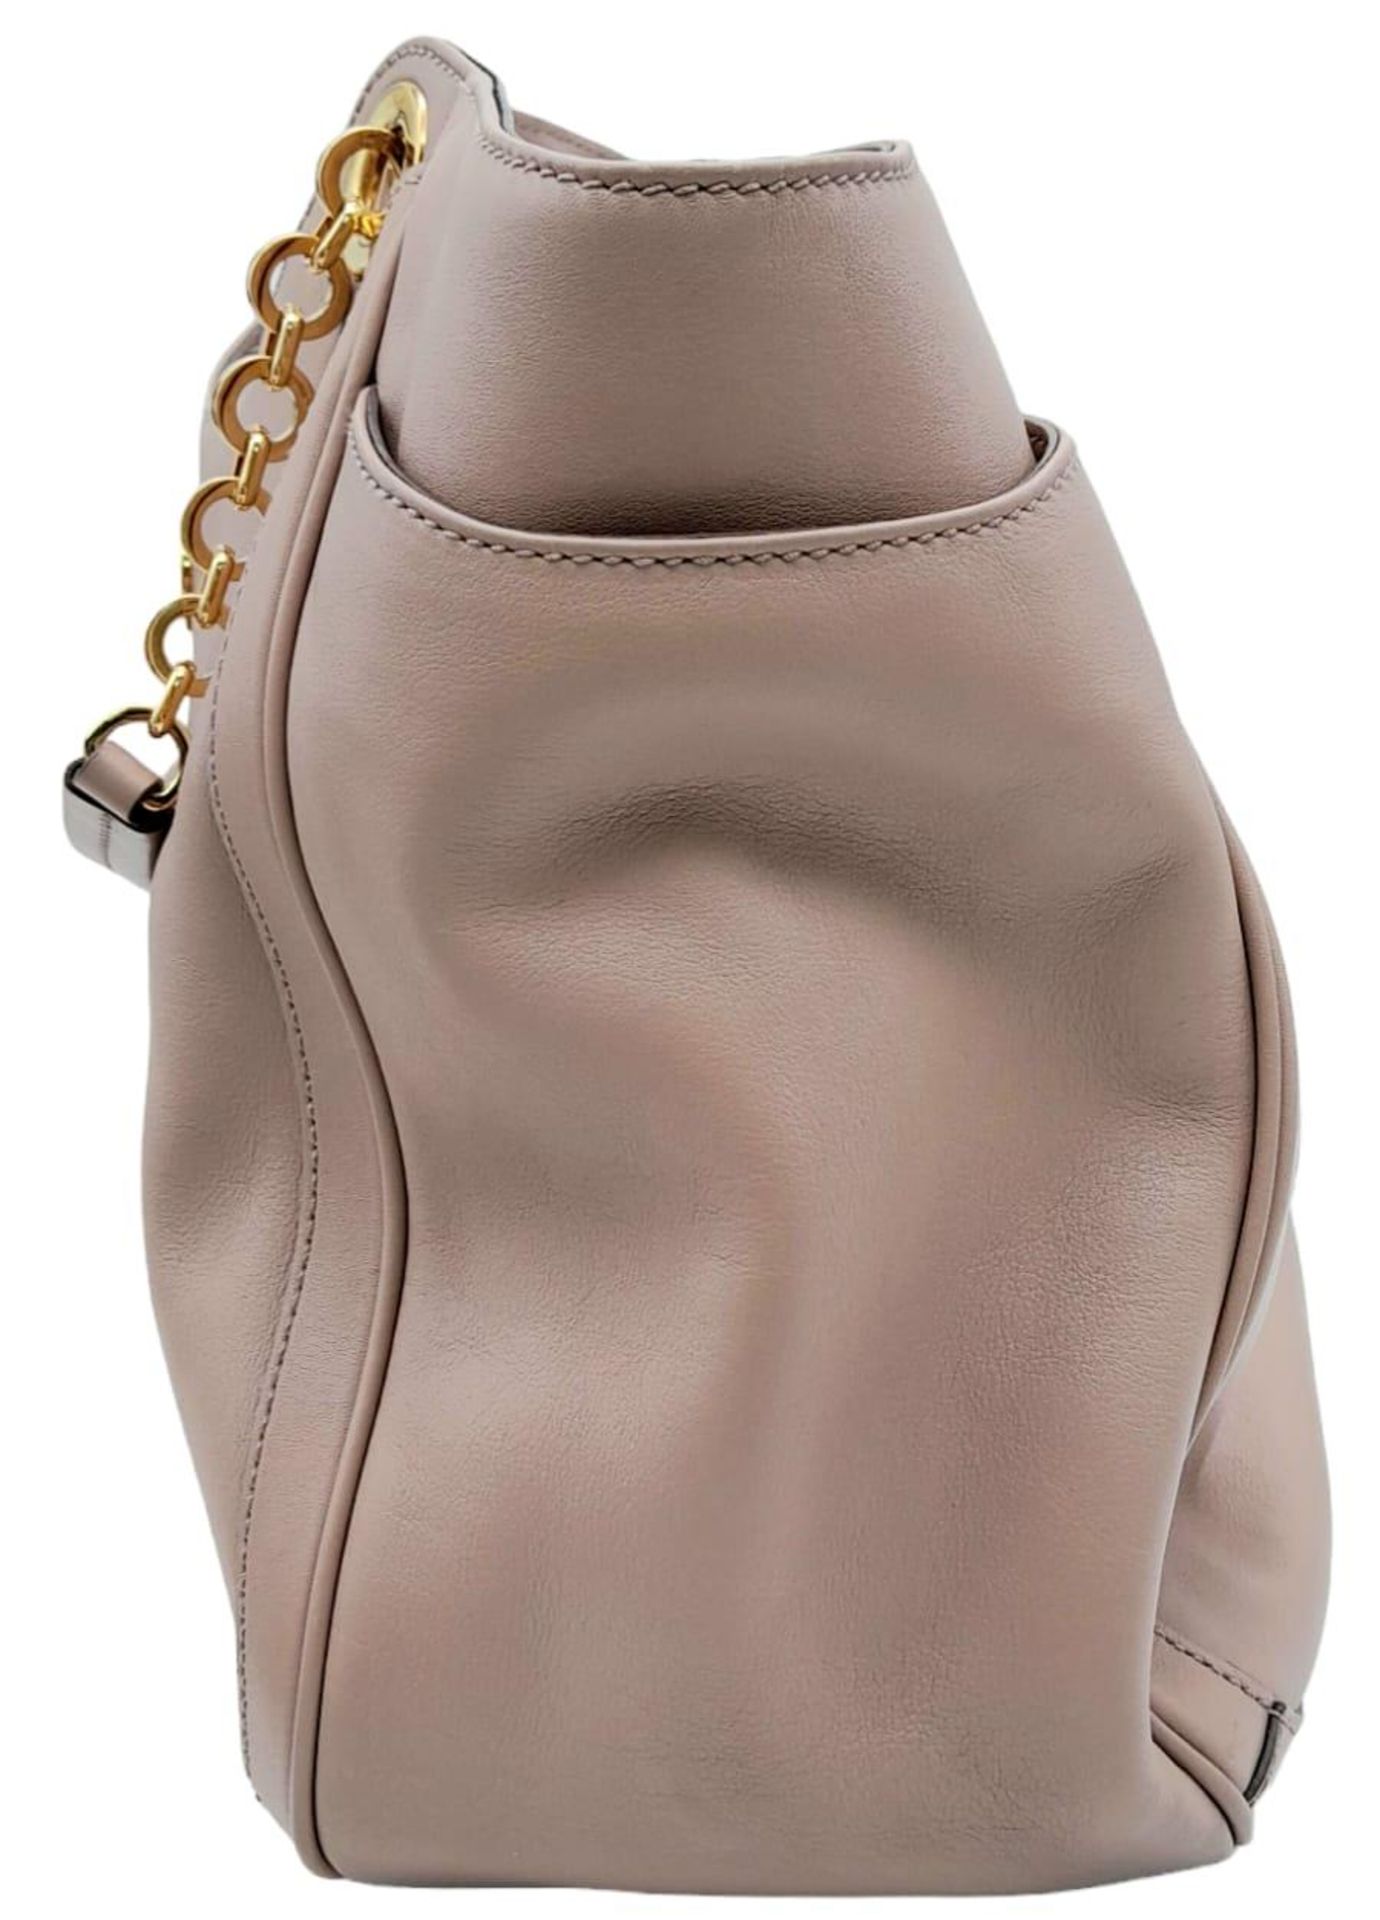 Salvatore Ferragamo Taupe Handbag. Double handle, central zipped compartment, gold tones and - Image 3 of 9